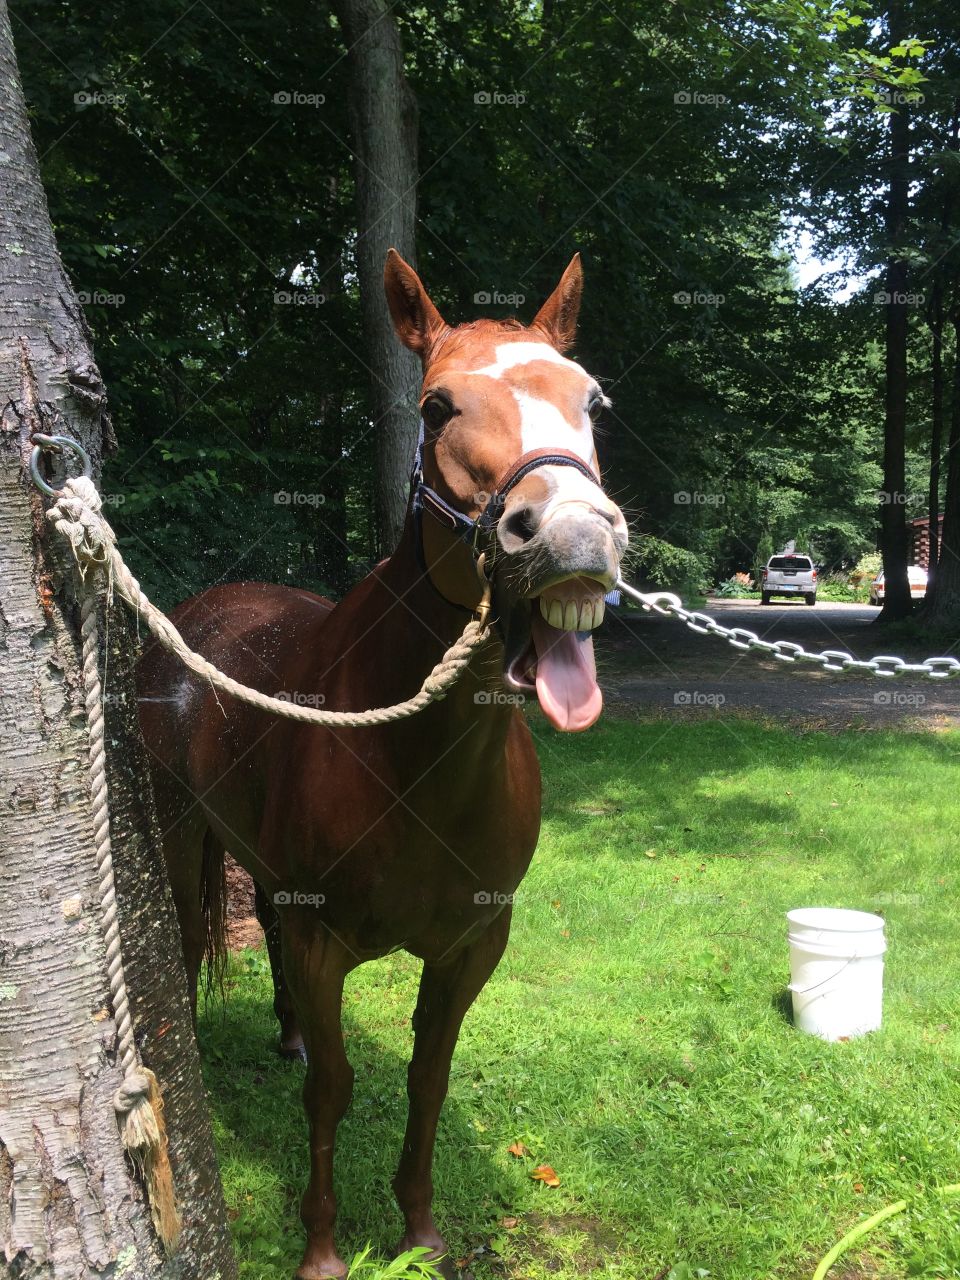 Bath time . Horses can have quite the personality like Suzy for example. Bath is always fun. 